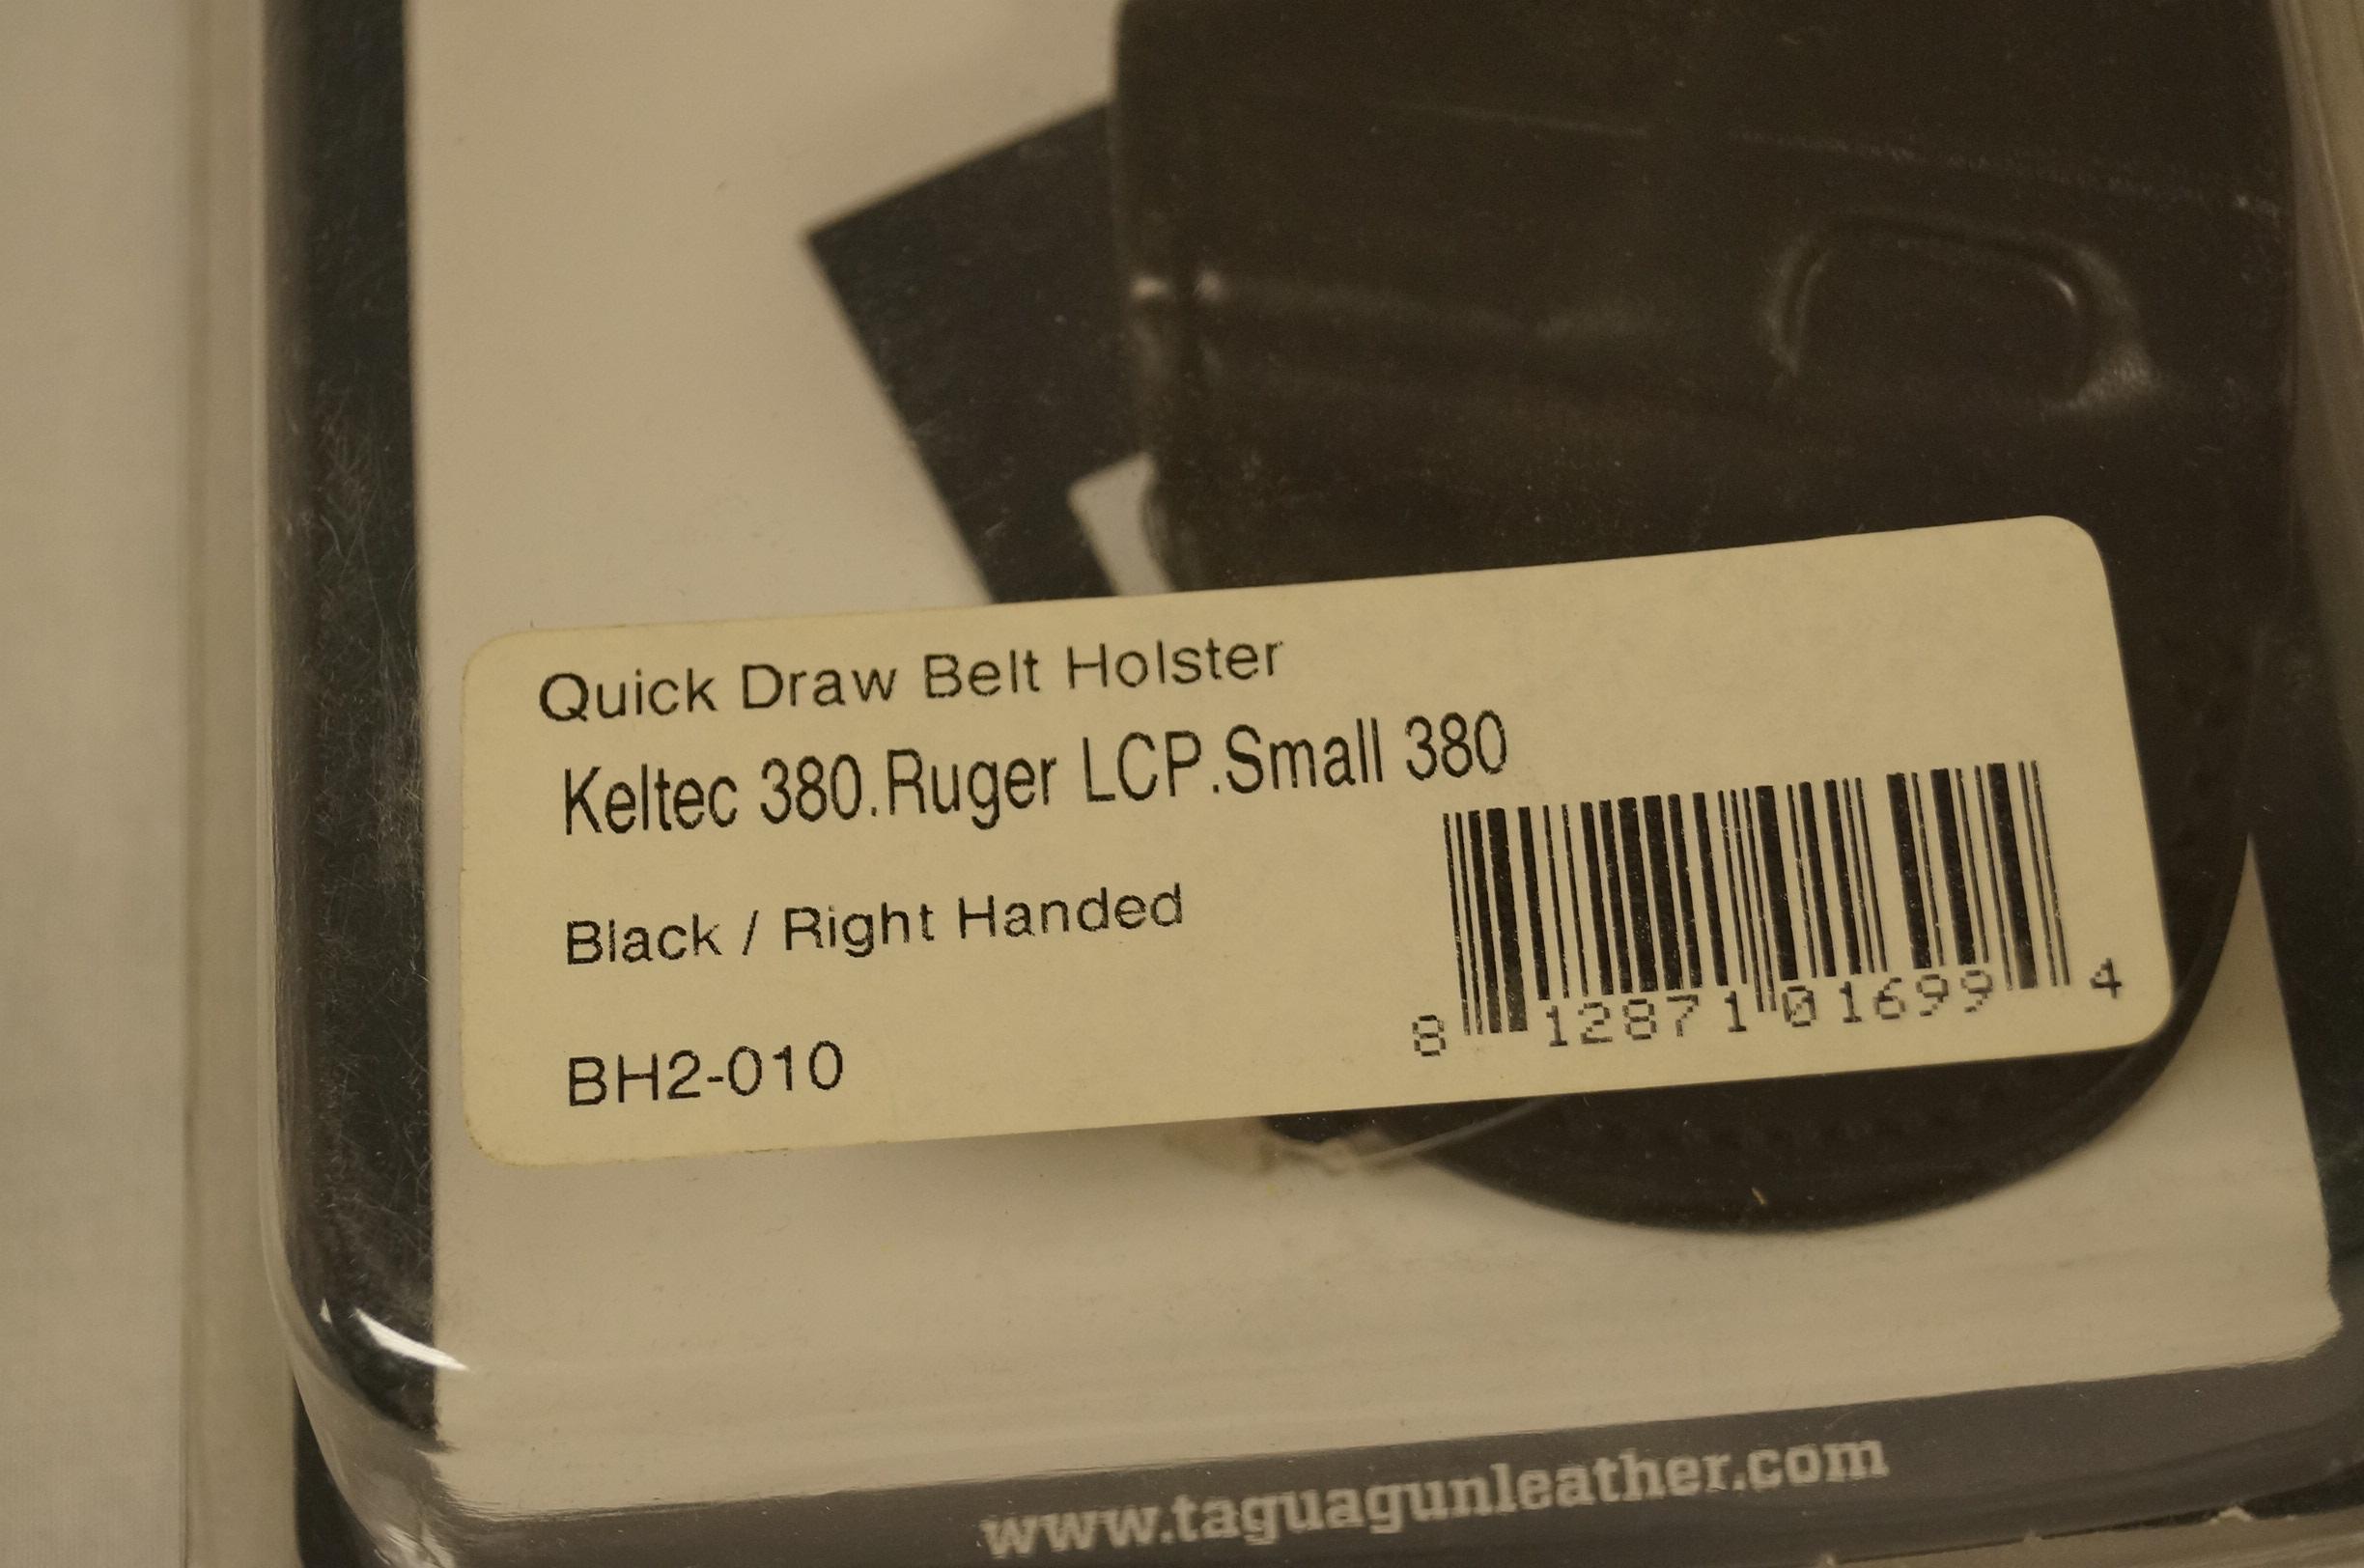 3 NIB Tagua Gunleather Right Handed Quick Draw Belt Holsters